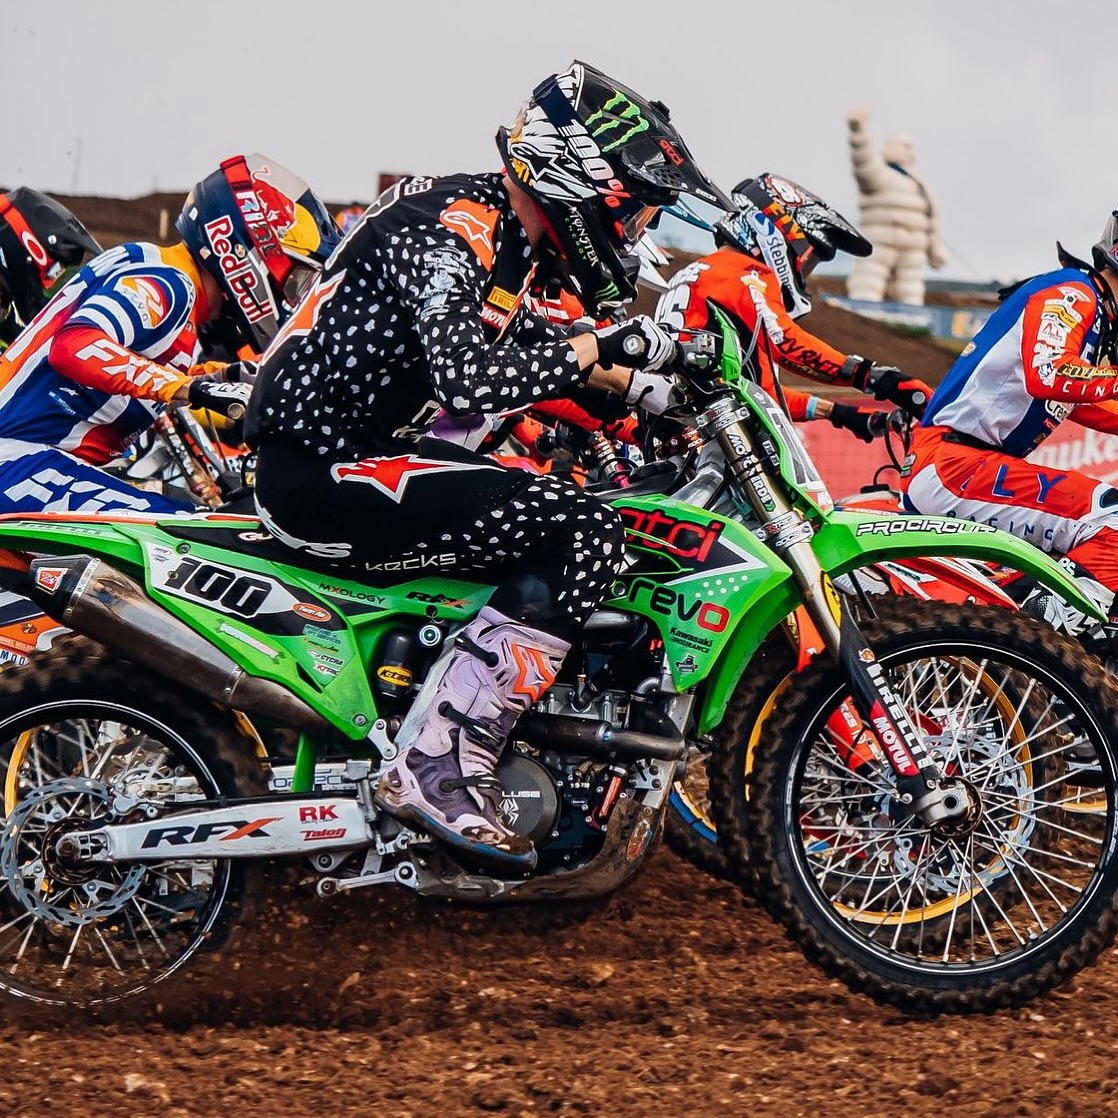 FASTEST 40 REV UP FOR FOXHILL